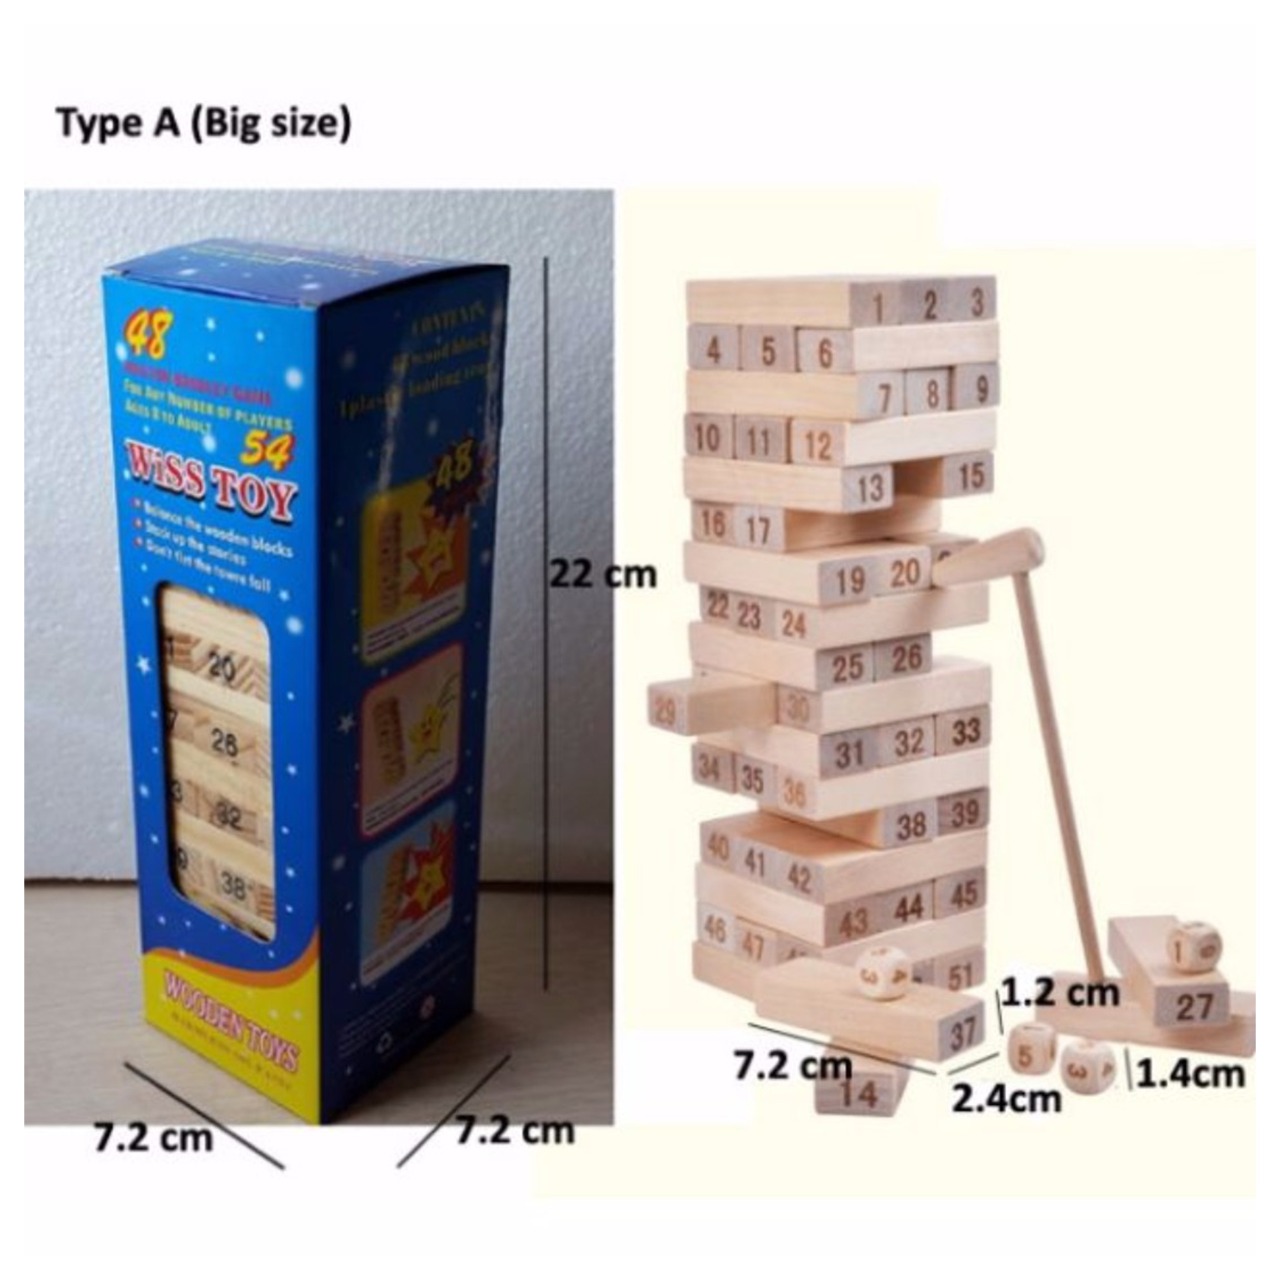 54 Wood Pieces Wiss Toy Wooden Blocks